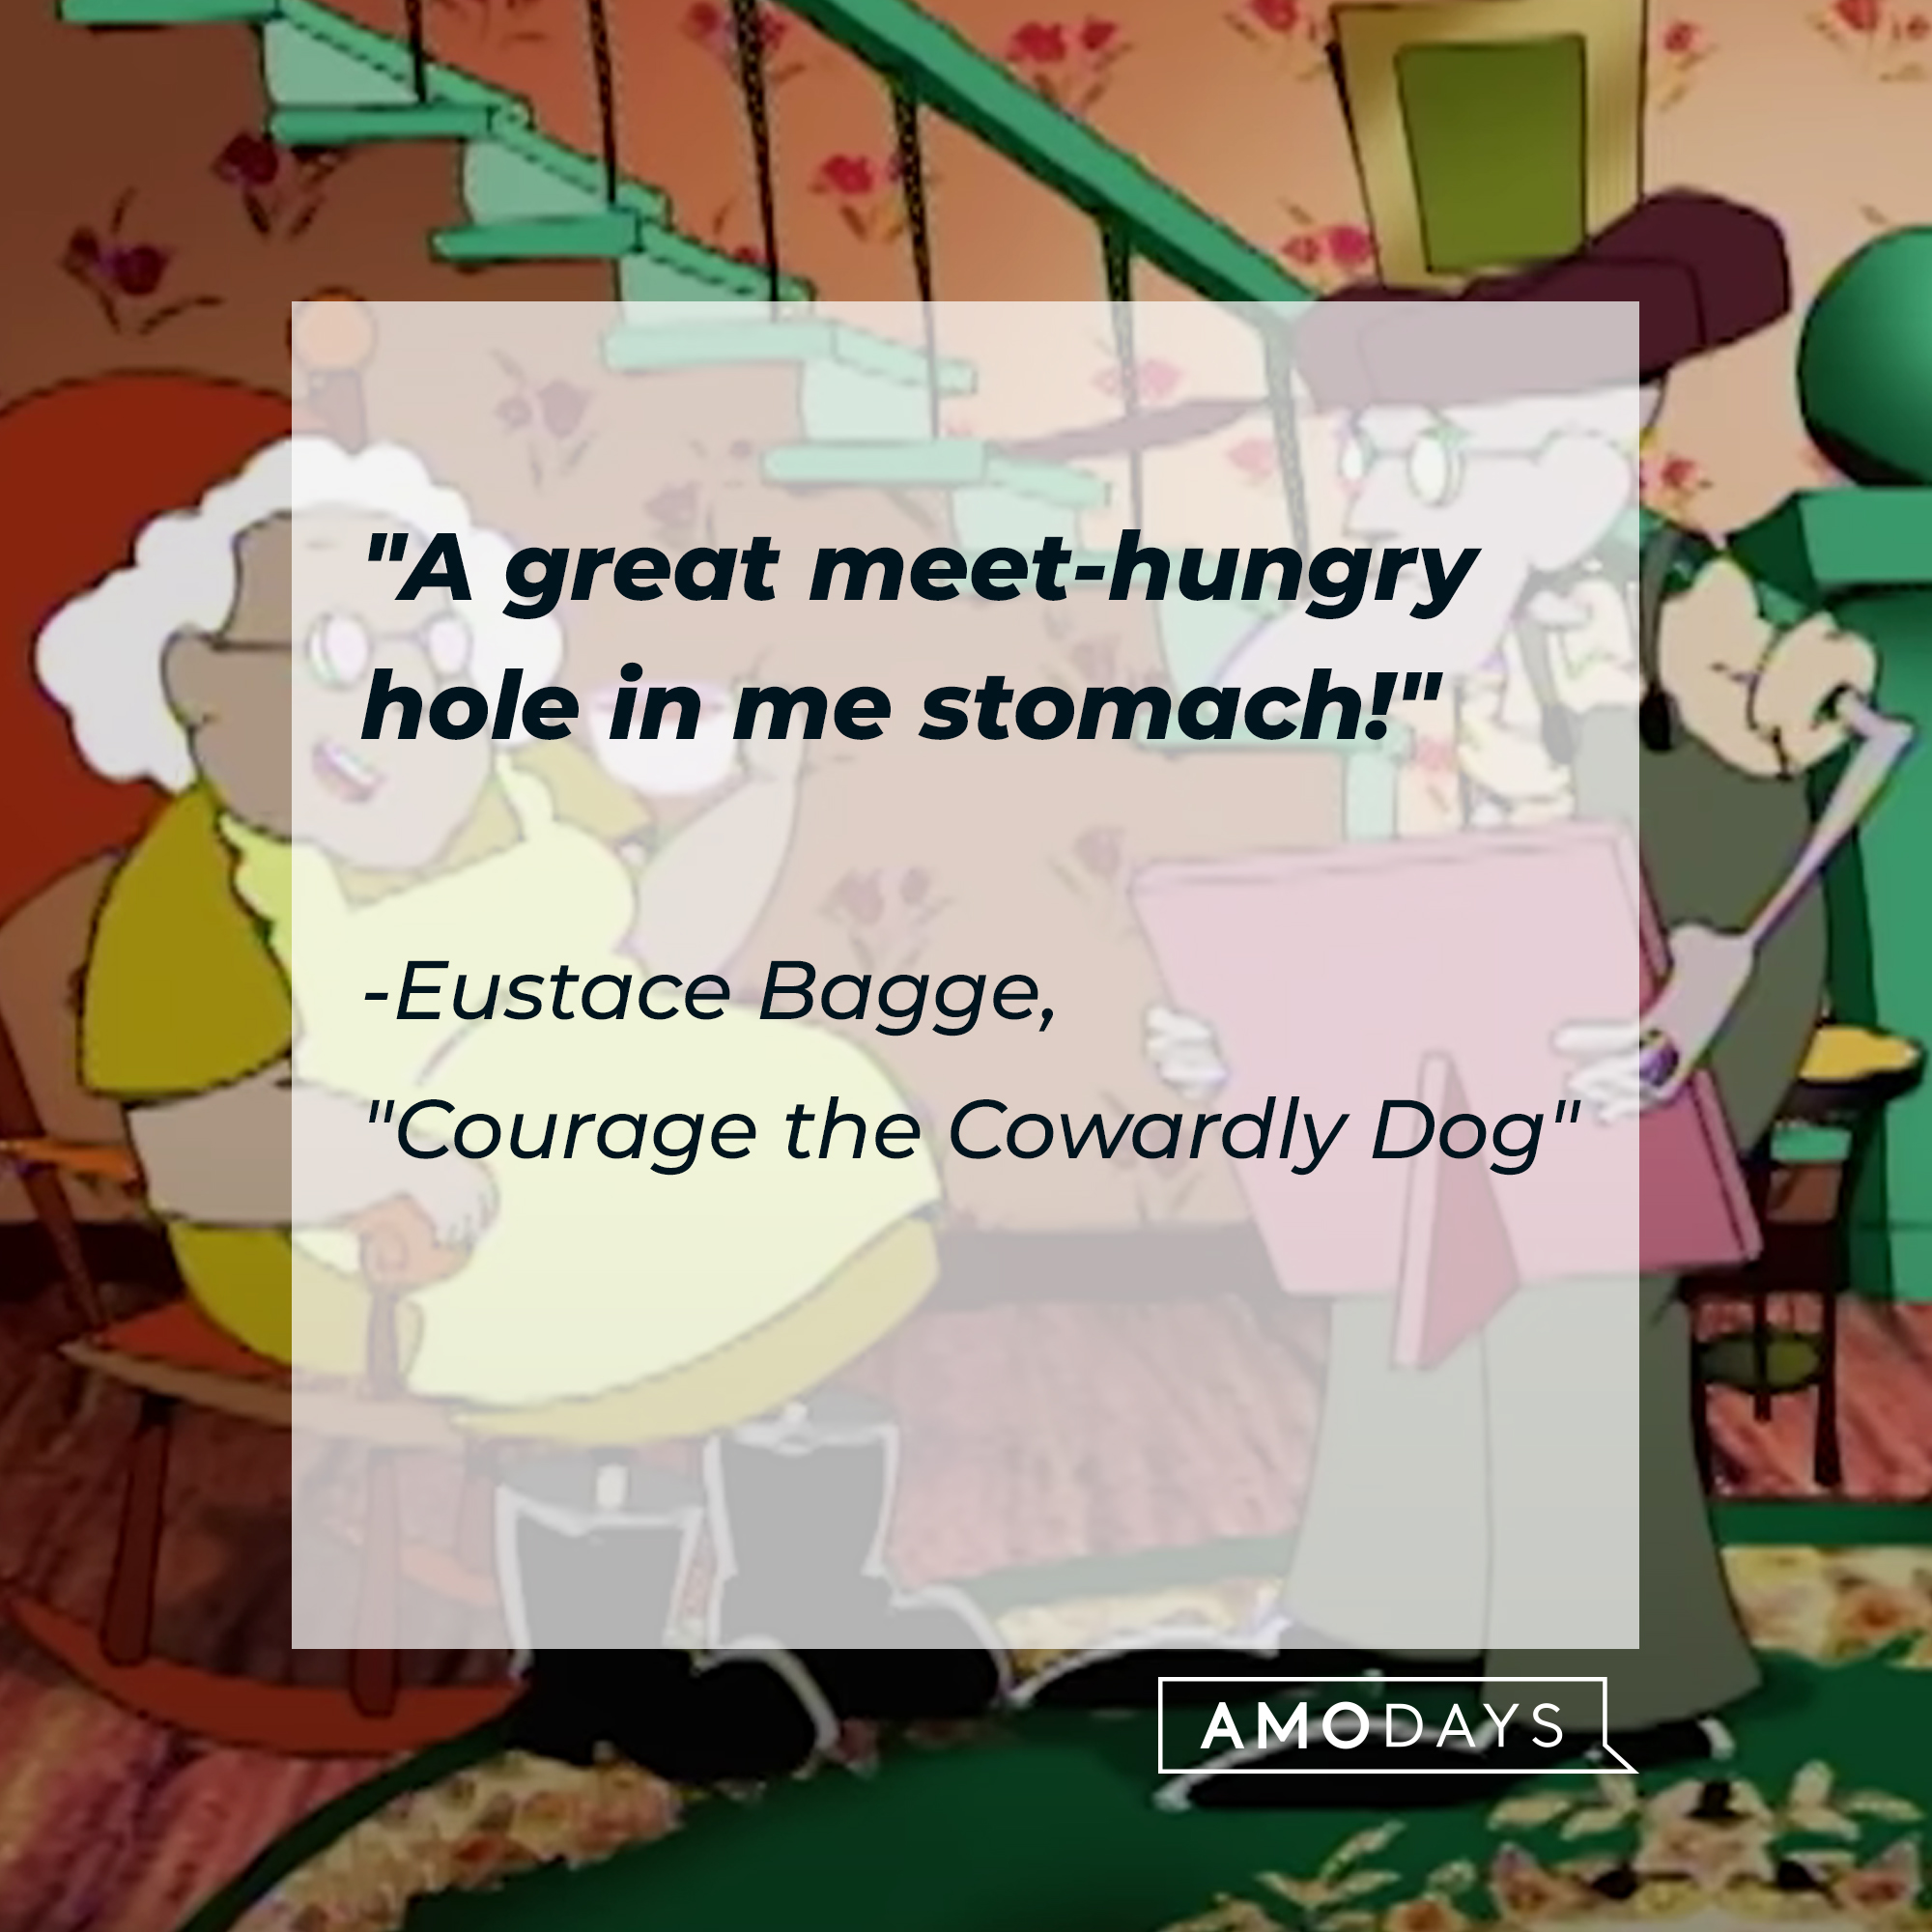 Eustace's quote: "A great meet-hungry hole in me stomach!" | Source: Facebook.com/CartoonNetwork